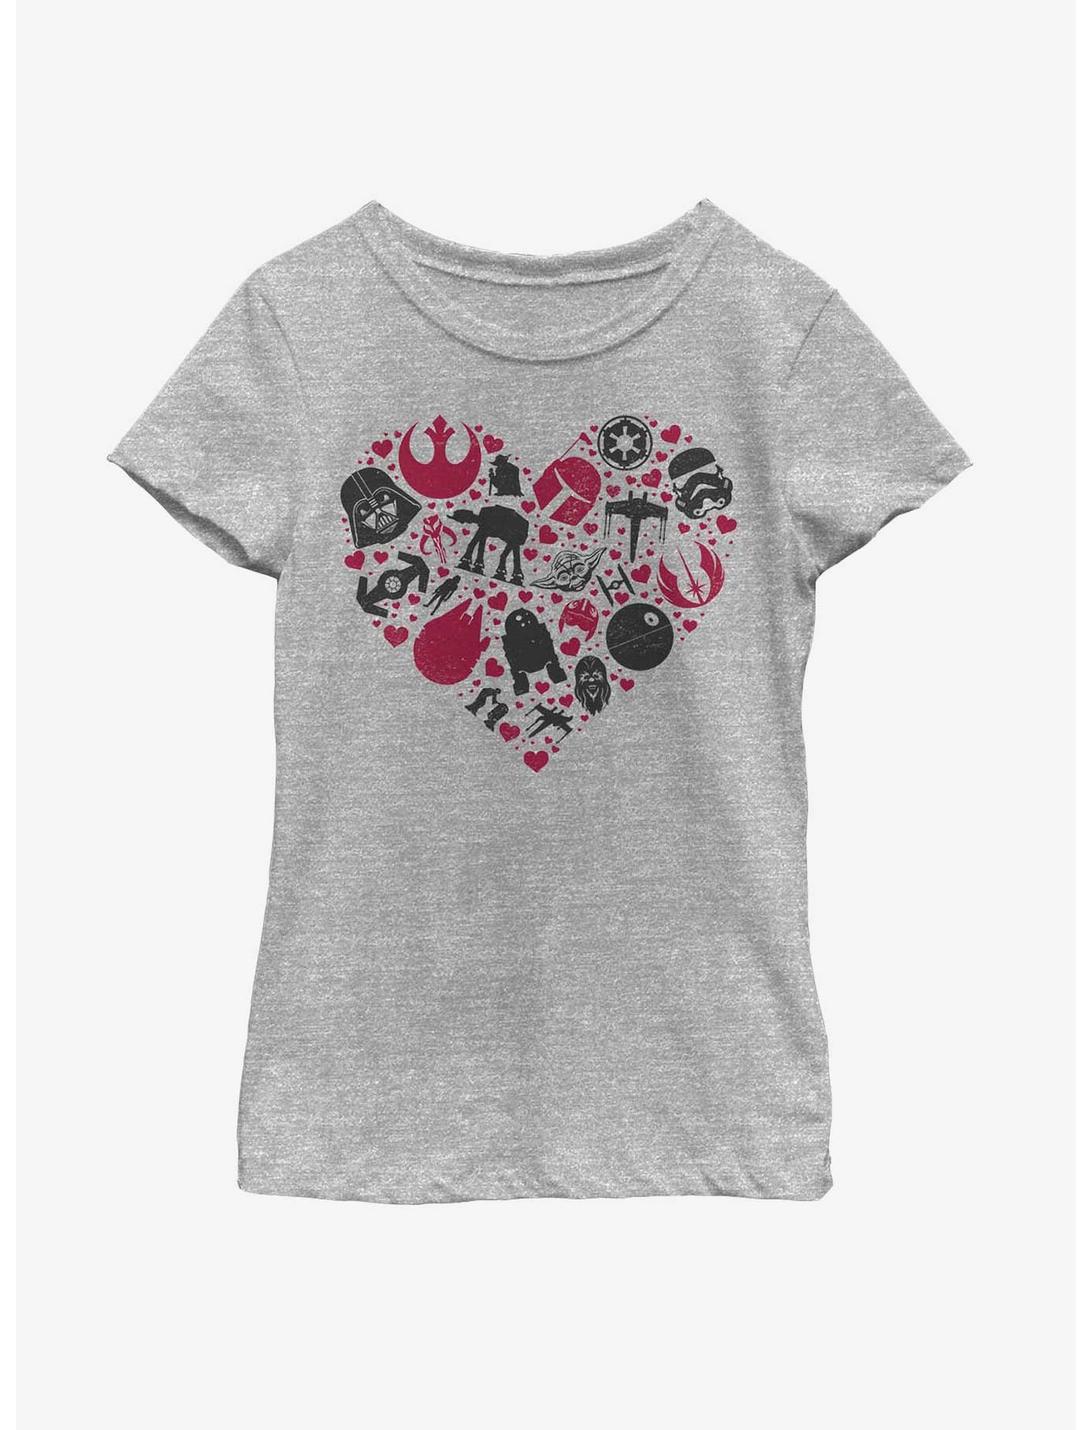 Star Wars Heart Icons Youth Girls T-Shirt, ATH HTR, hi-res